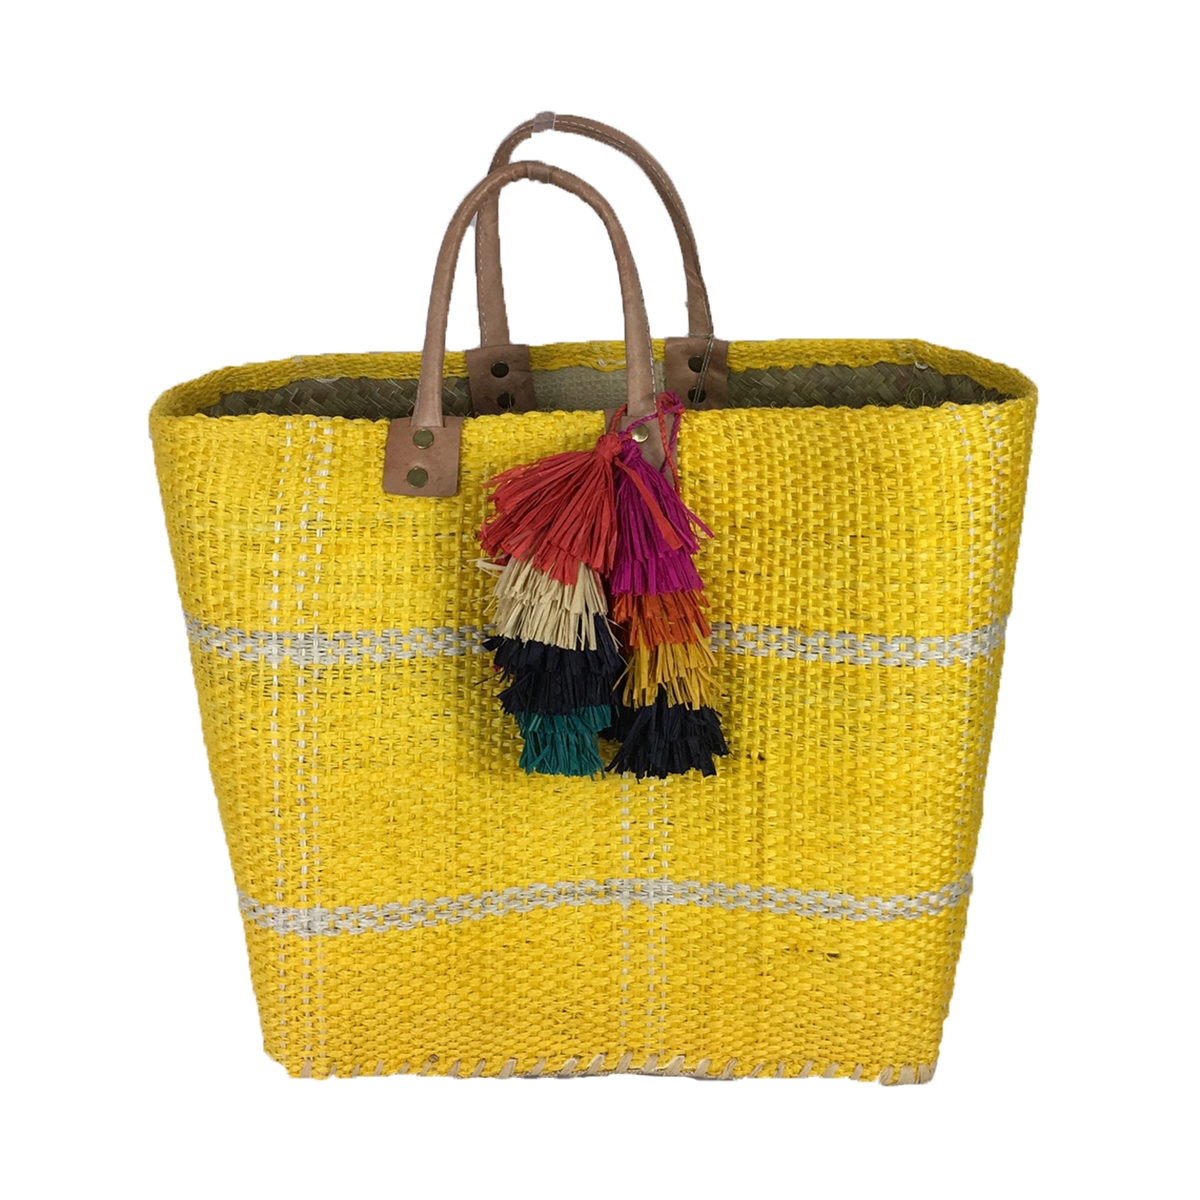 Amazon.com: Epsion Straw Beach Bags Tote Tassels Bag Hobo Summer Handwoven  Shoulder Bags Purse With Pom Poms : Clothing, Shoes & Jewelry